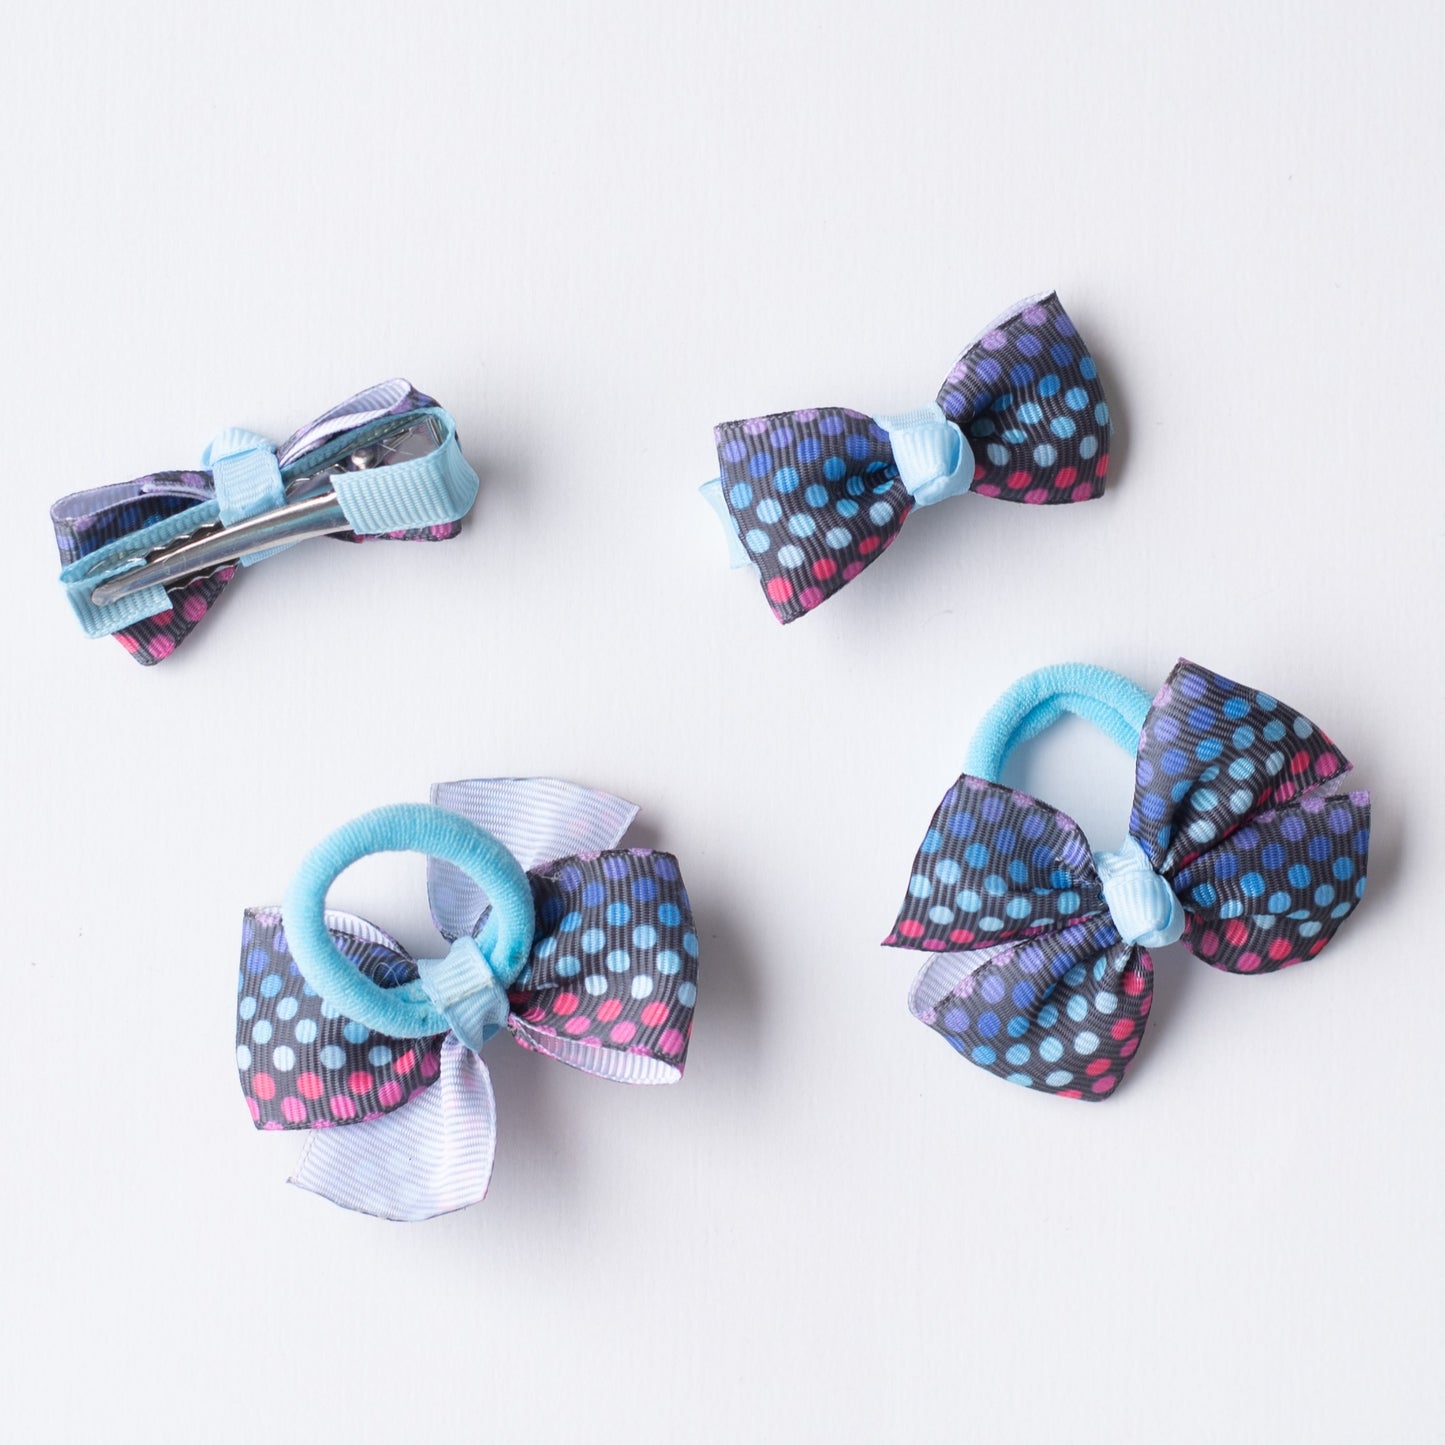 Combo: Polkadot print small bow on alligator cips and matching small rubberbands (4 nos) - Blue and Black.